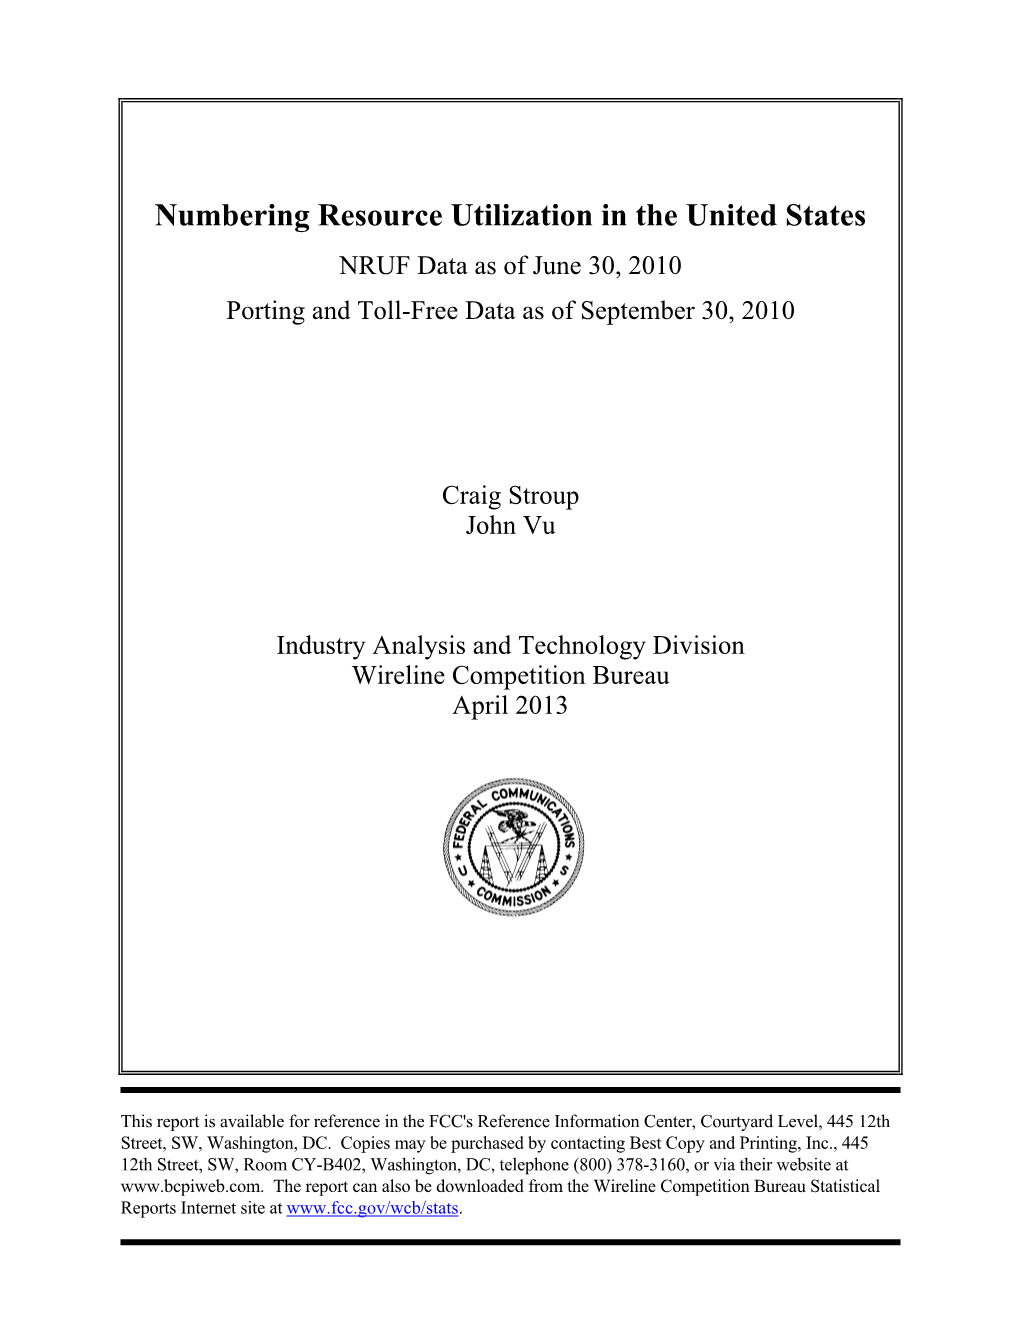 Numbering Resource Utilization in the United States NRUF Data As of June 30, 2010 Porting and Toll-Free Data As of September 30, 2010